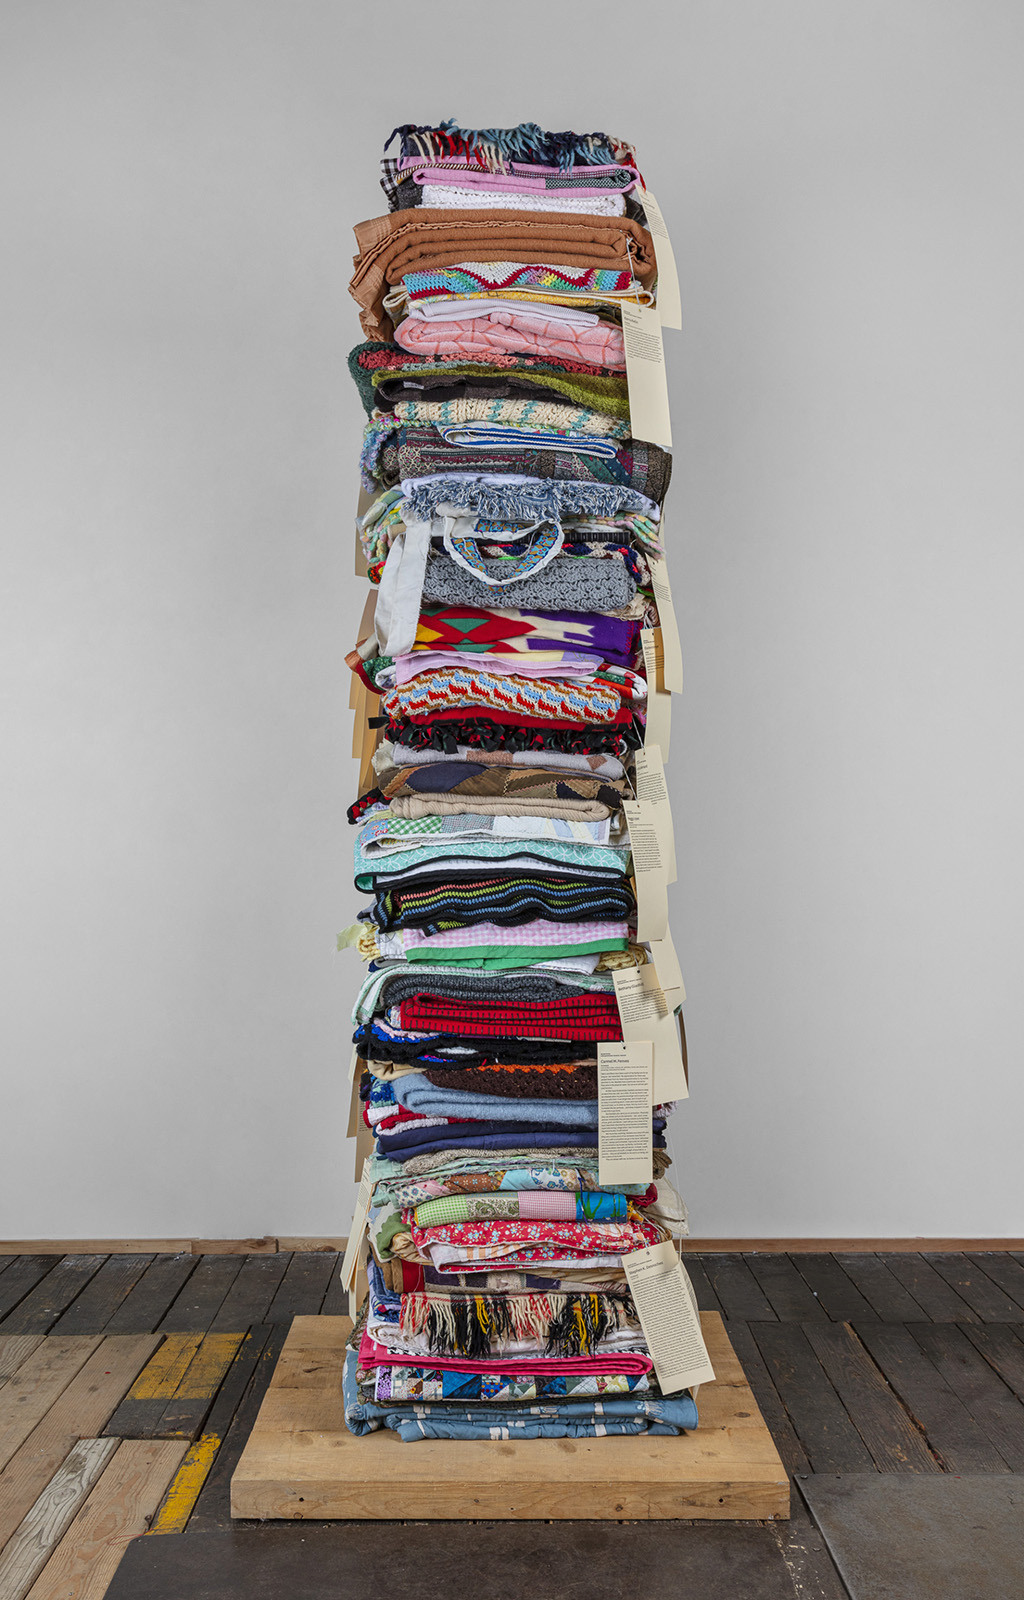 A tower of folded blankets in many colorful patterns is placed on a wooded base and long paper labels with text hang off the individual blankets